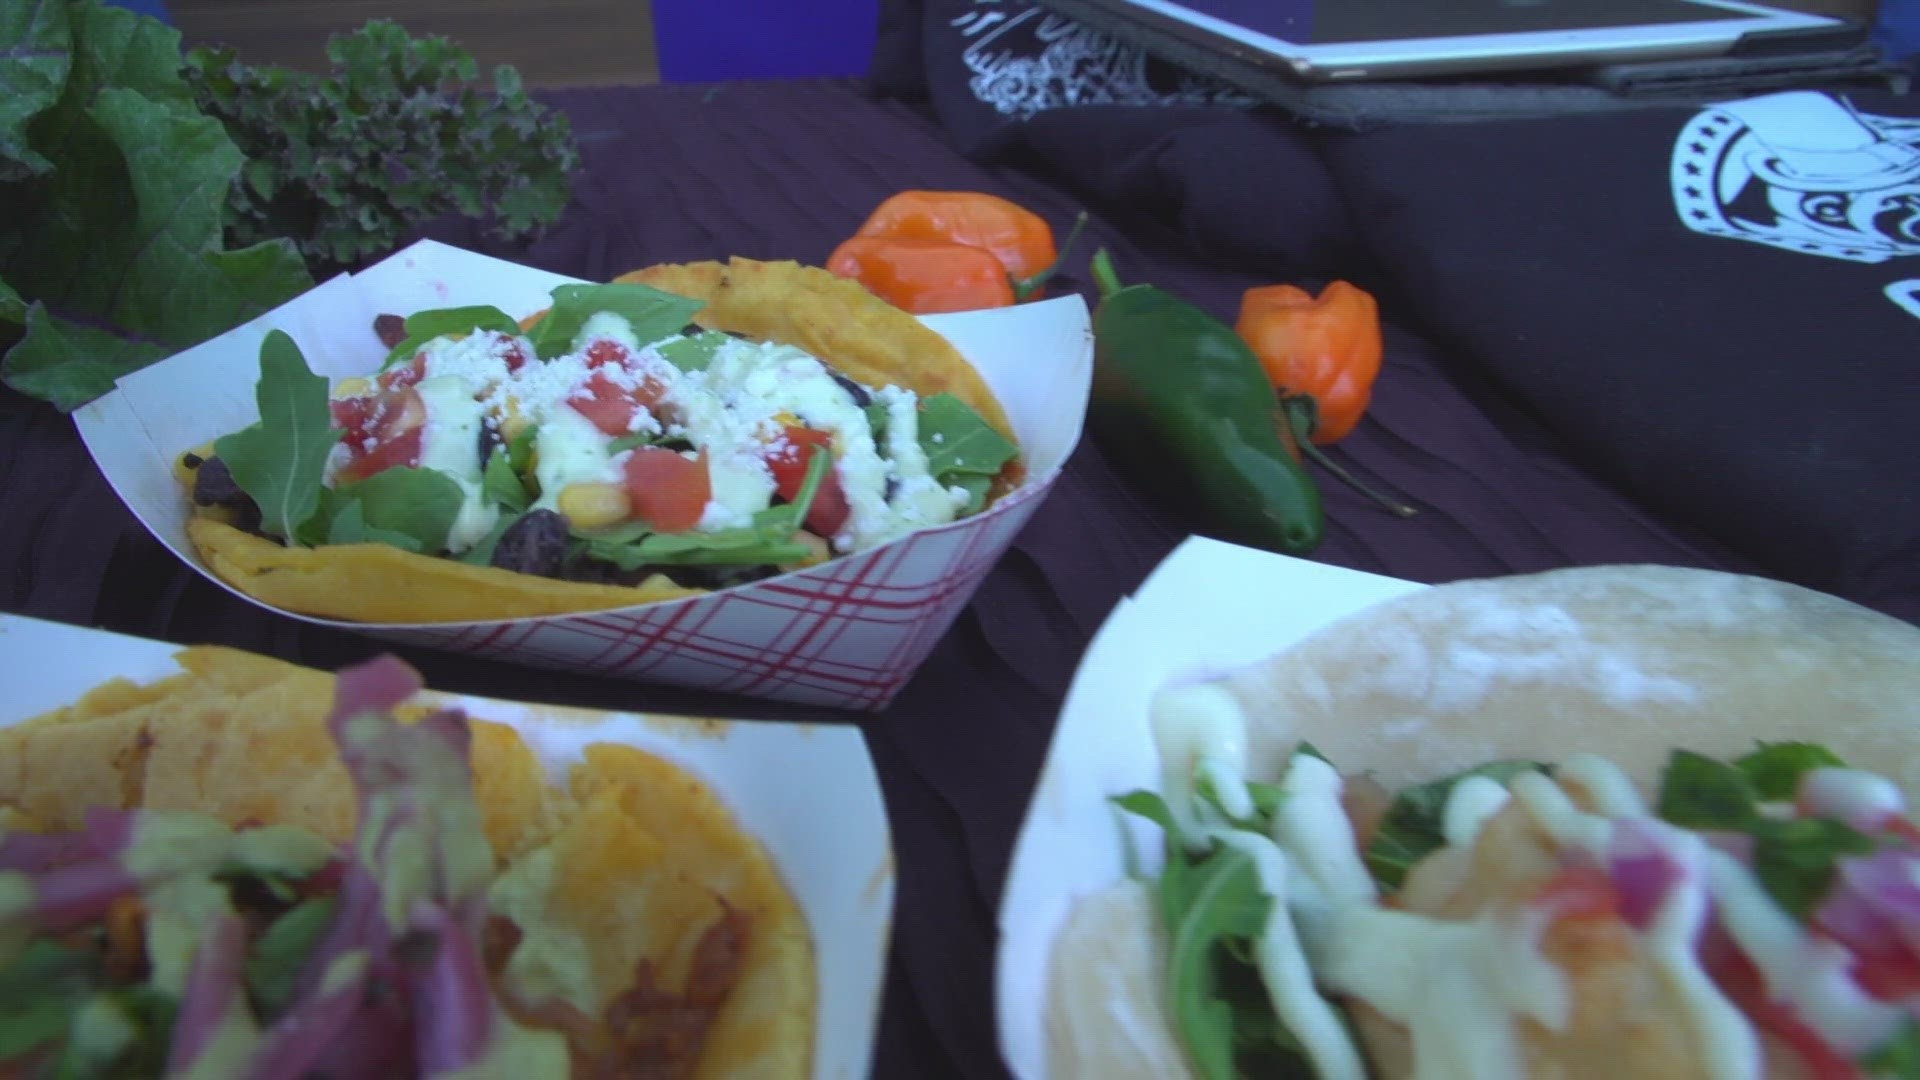 Paul Garduno of Casa Octavio and Gerald Torres from City Tacos visits CBS 8 Mornings to discuss the importance of Hispanic Heritage in San Diego